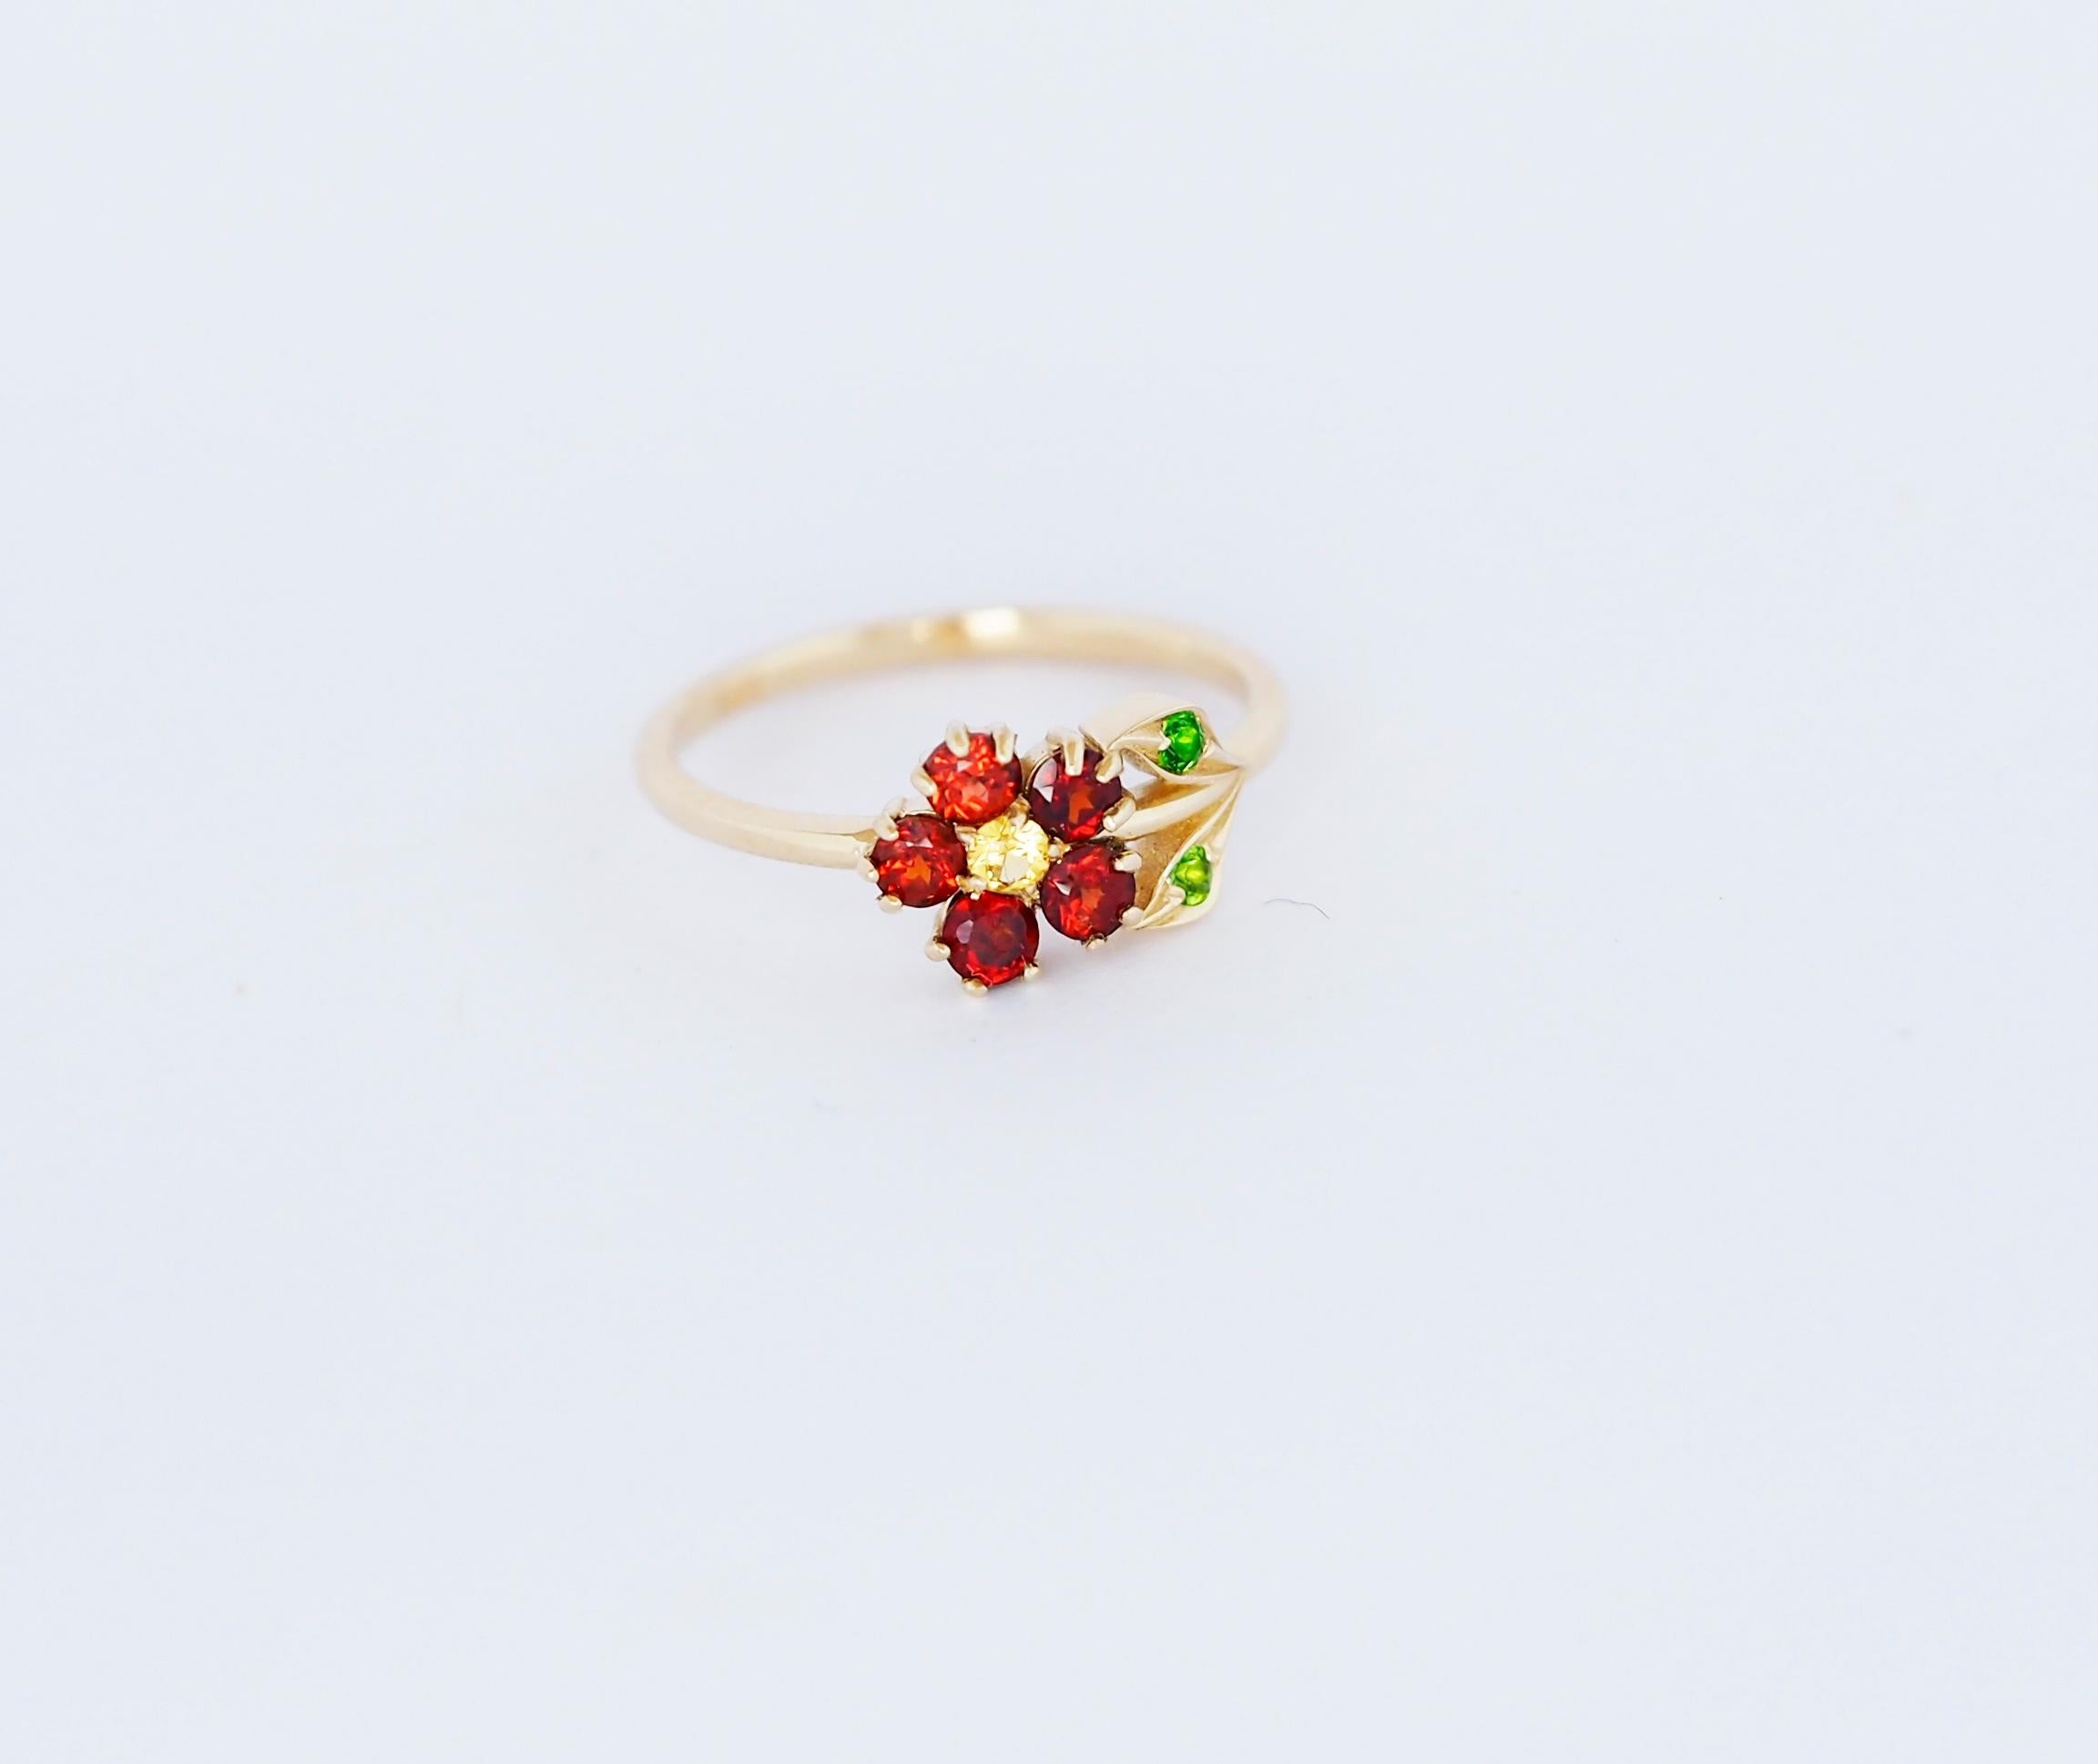 For Sale:  Flower Ring in 14 Karat Gold, Sapphire, Garnet and Chrome Diopsides Ring 6